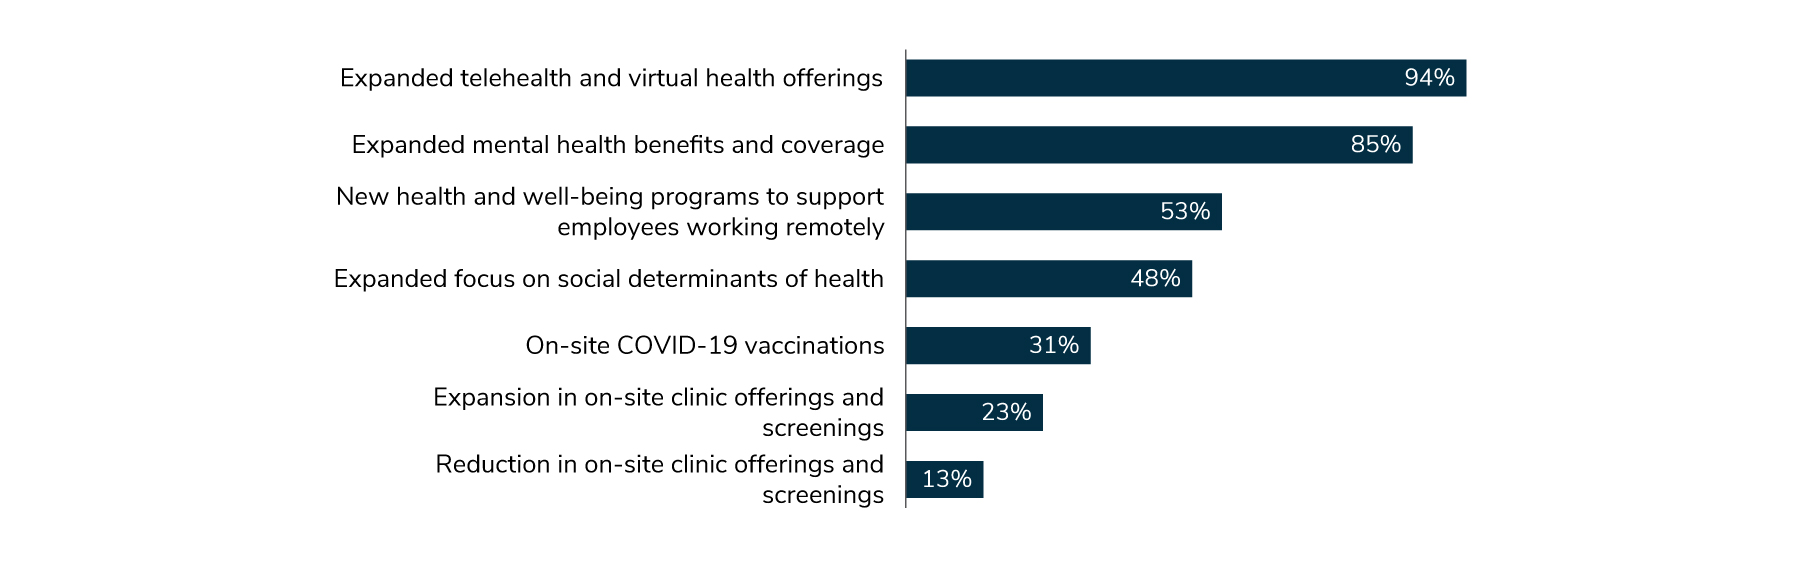 Employers will continue their expanded virtual offerings (94%), expanded mental health offerings (85%) and programs to support remote employees (53%). 